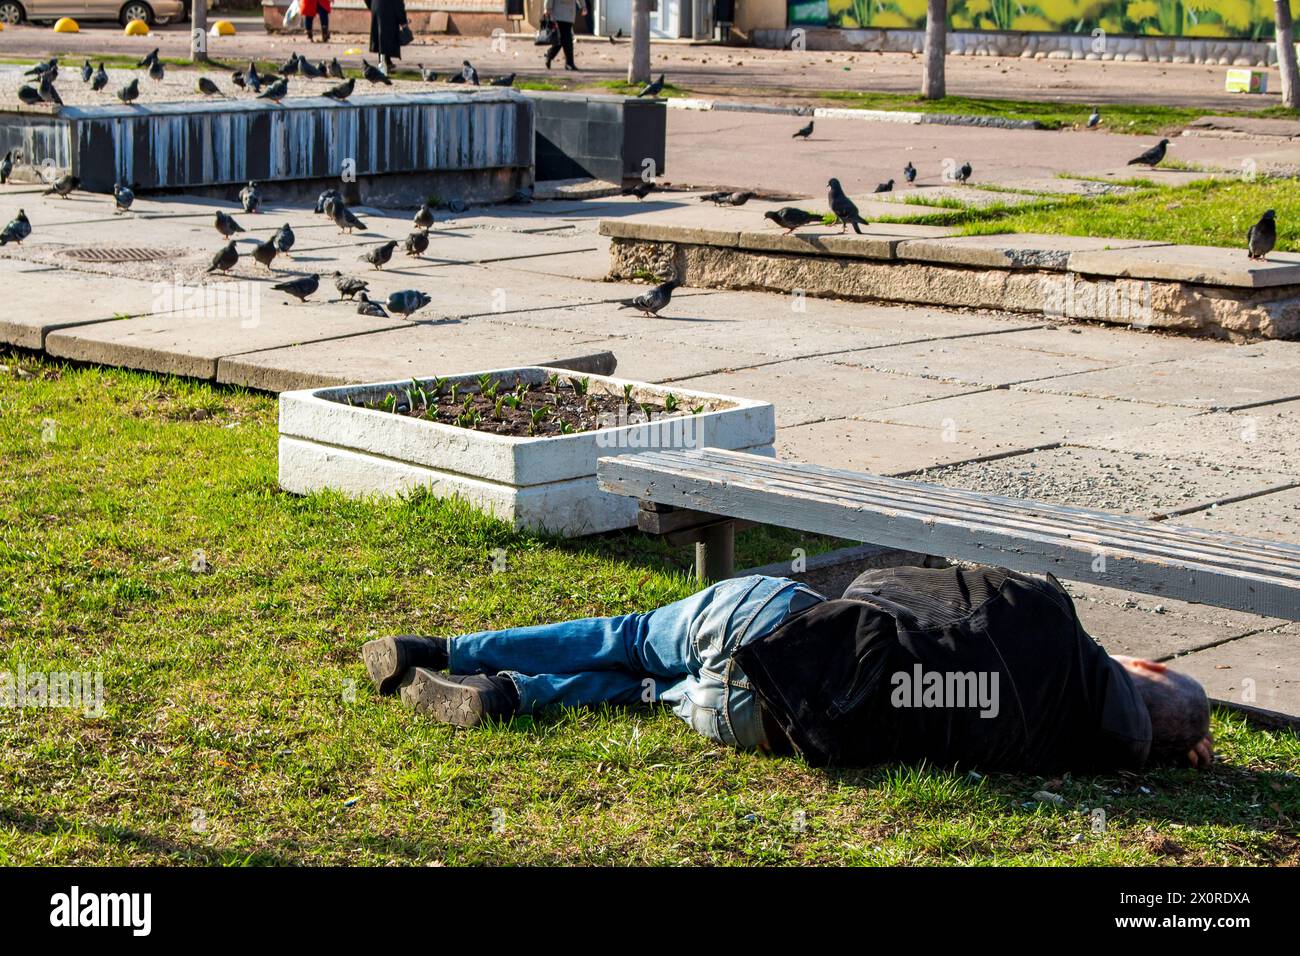 Drunk man sleeping on the grass under a bench on a city street Stock Photo